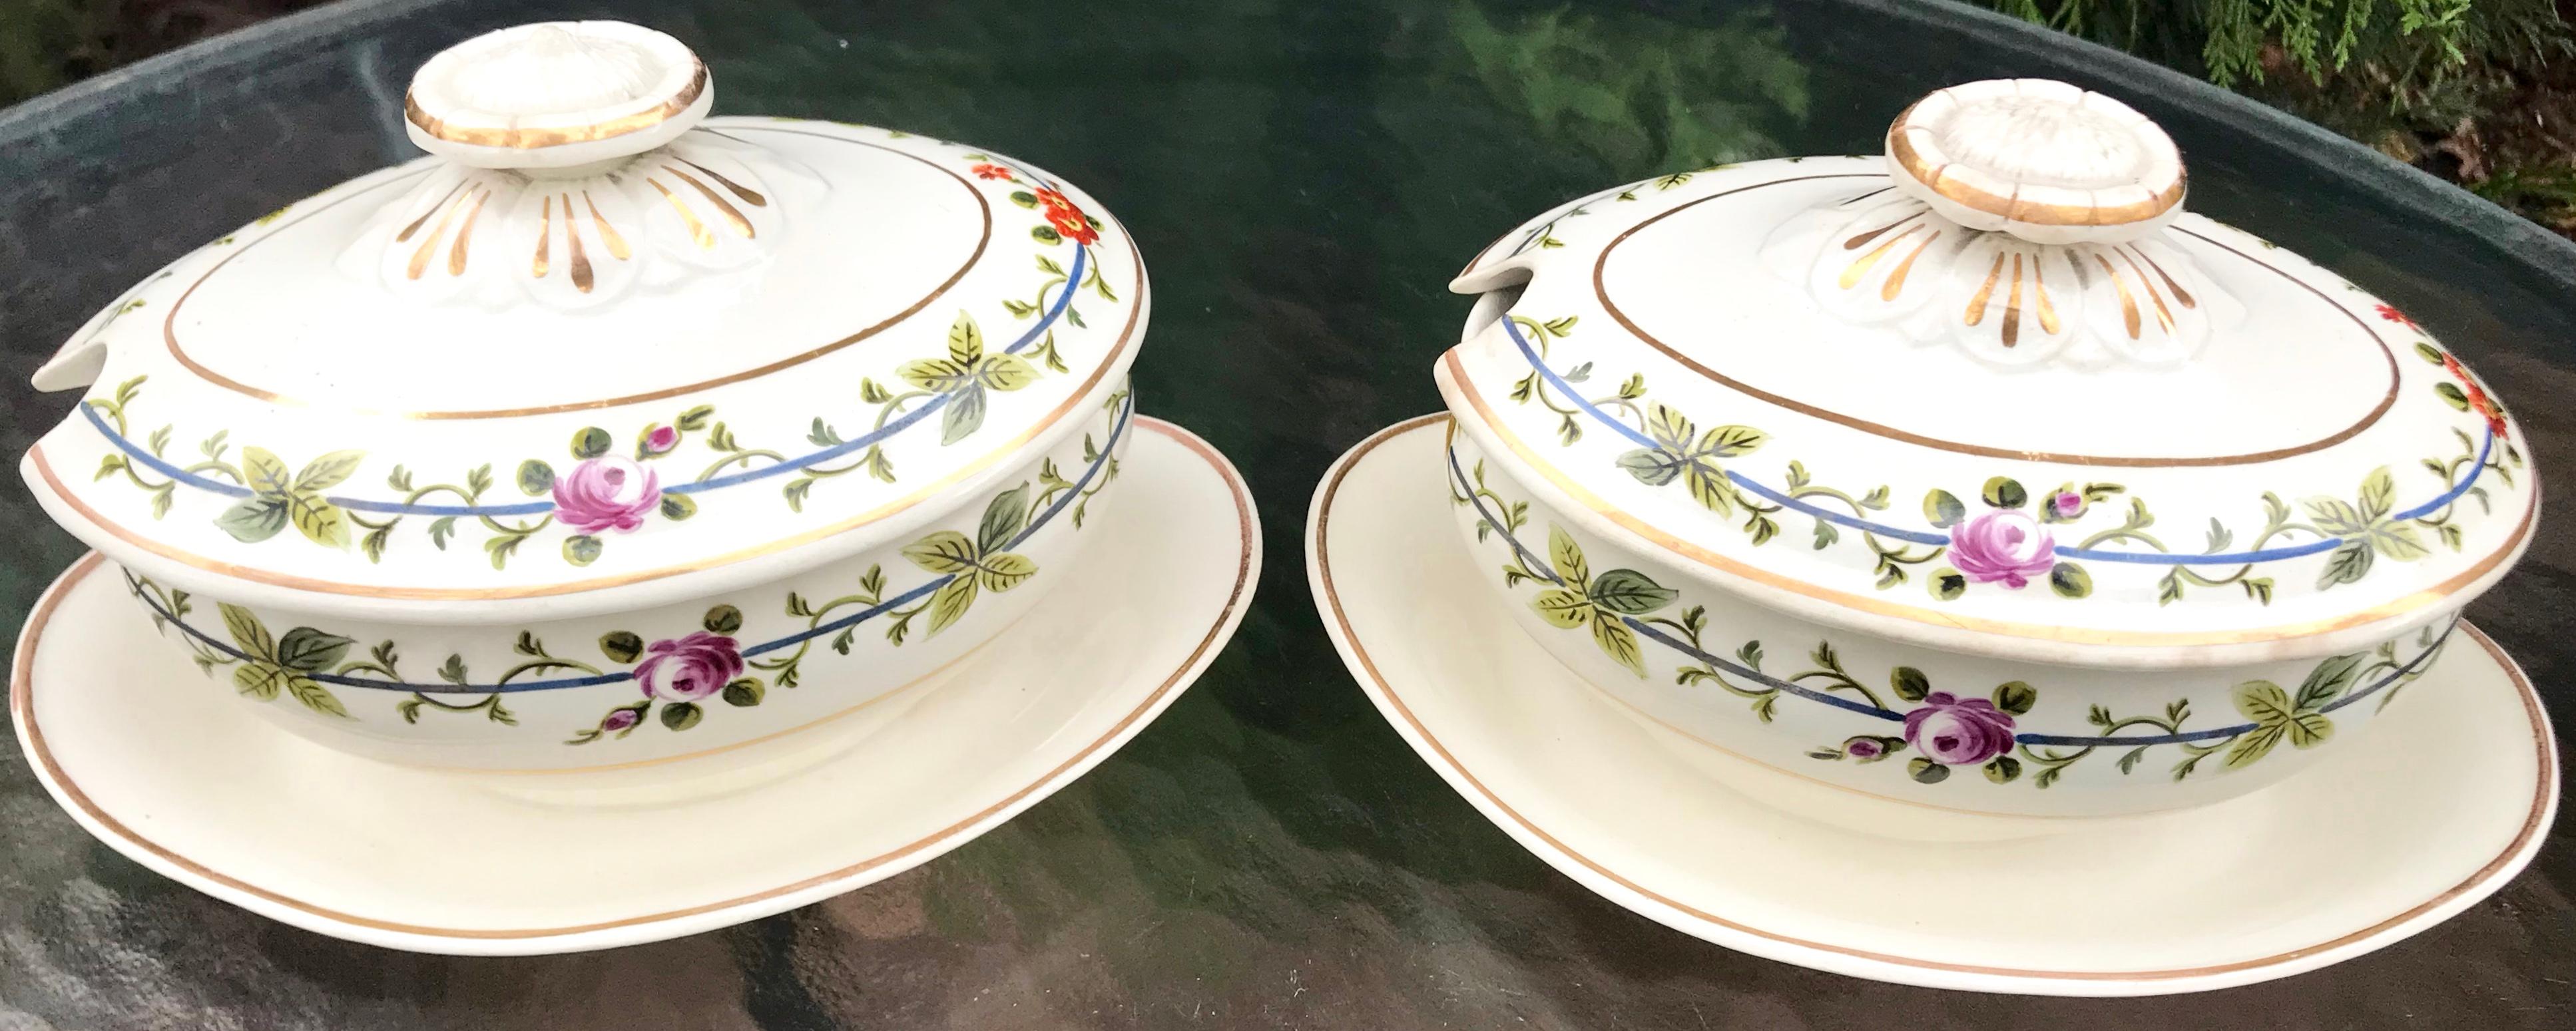 English Pair of Wedgwood Creamware Floral Banded Sauceboats For Sale